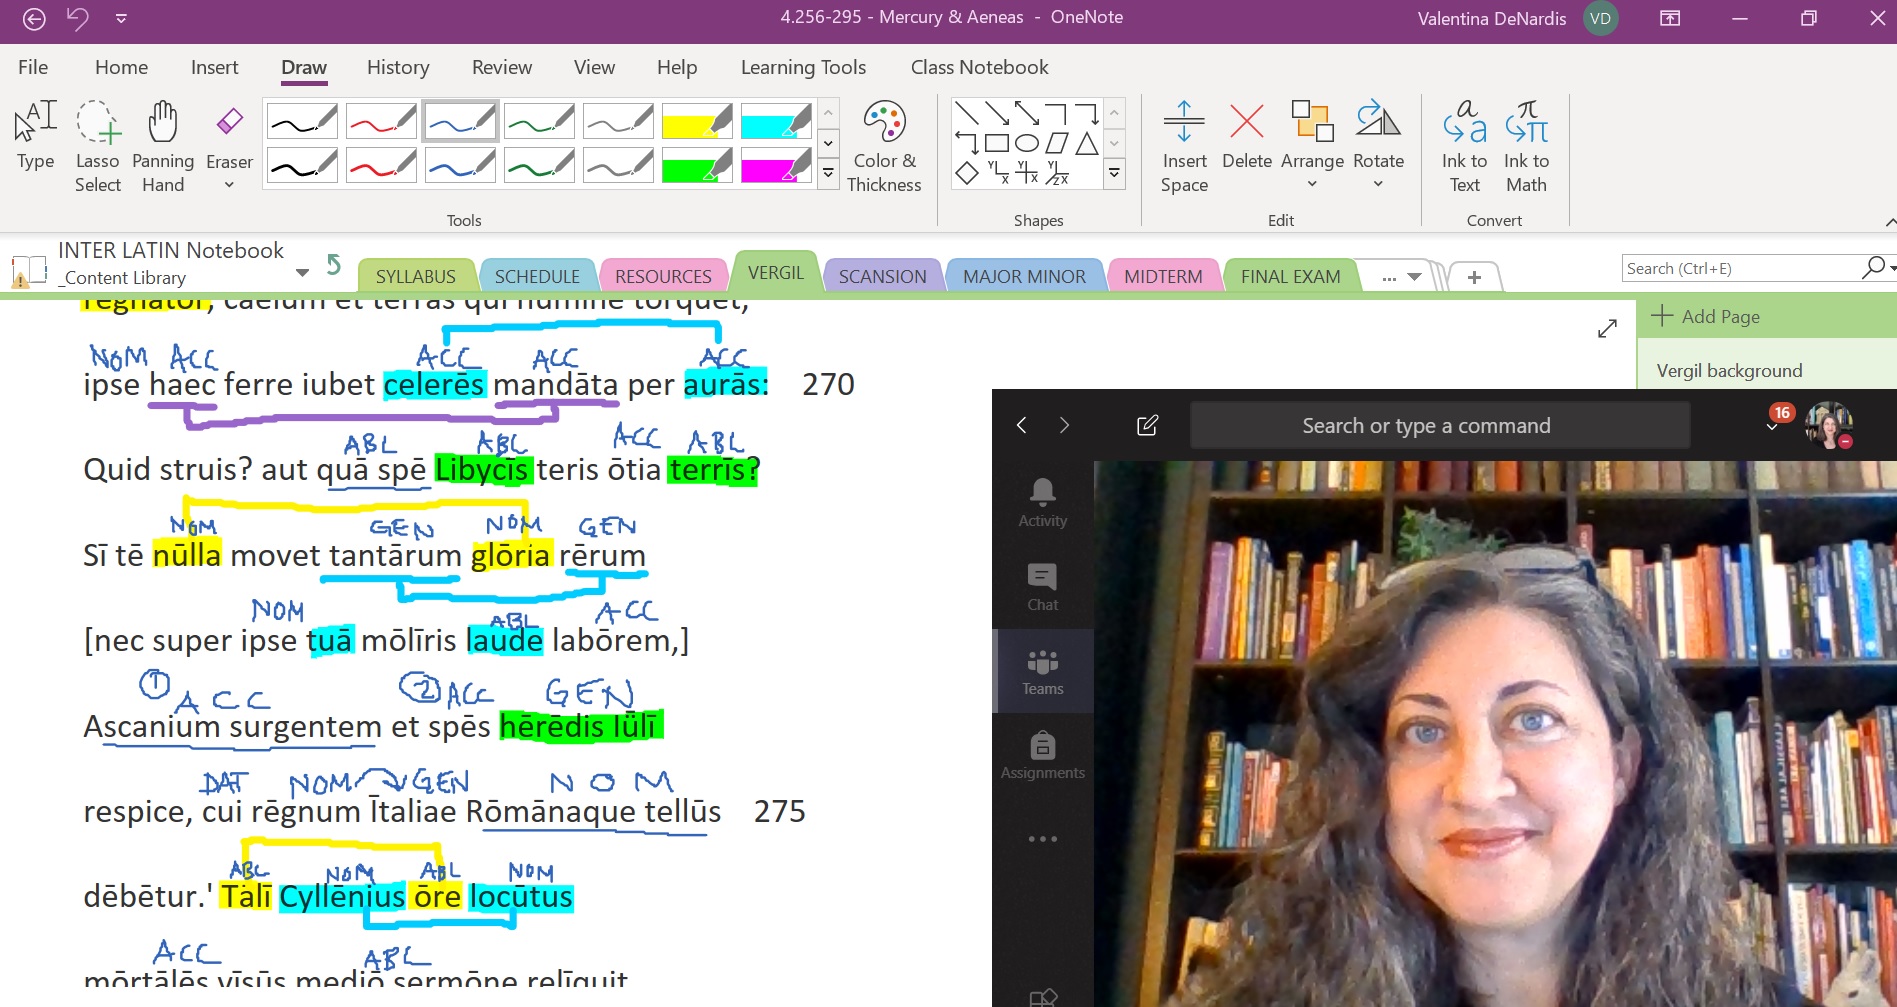 Photo of Dr. DenNardis's face on a video screen next to a heavily annotated piece of Latin text on her OneNote screen that she shares with her students